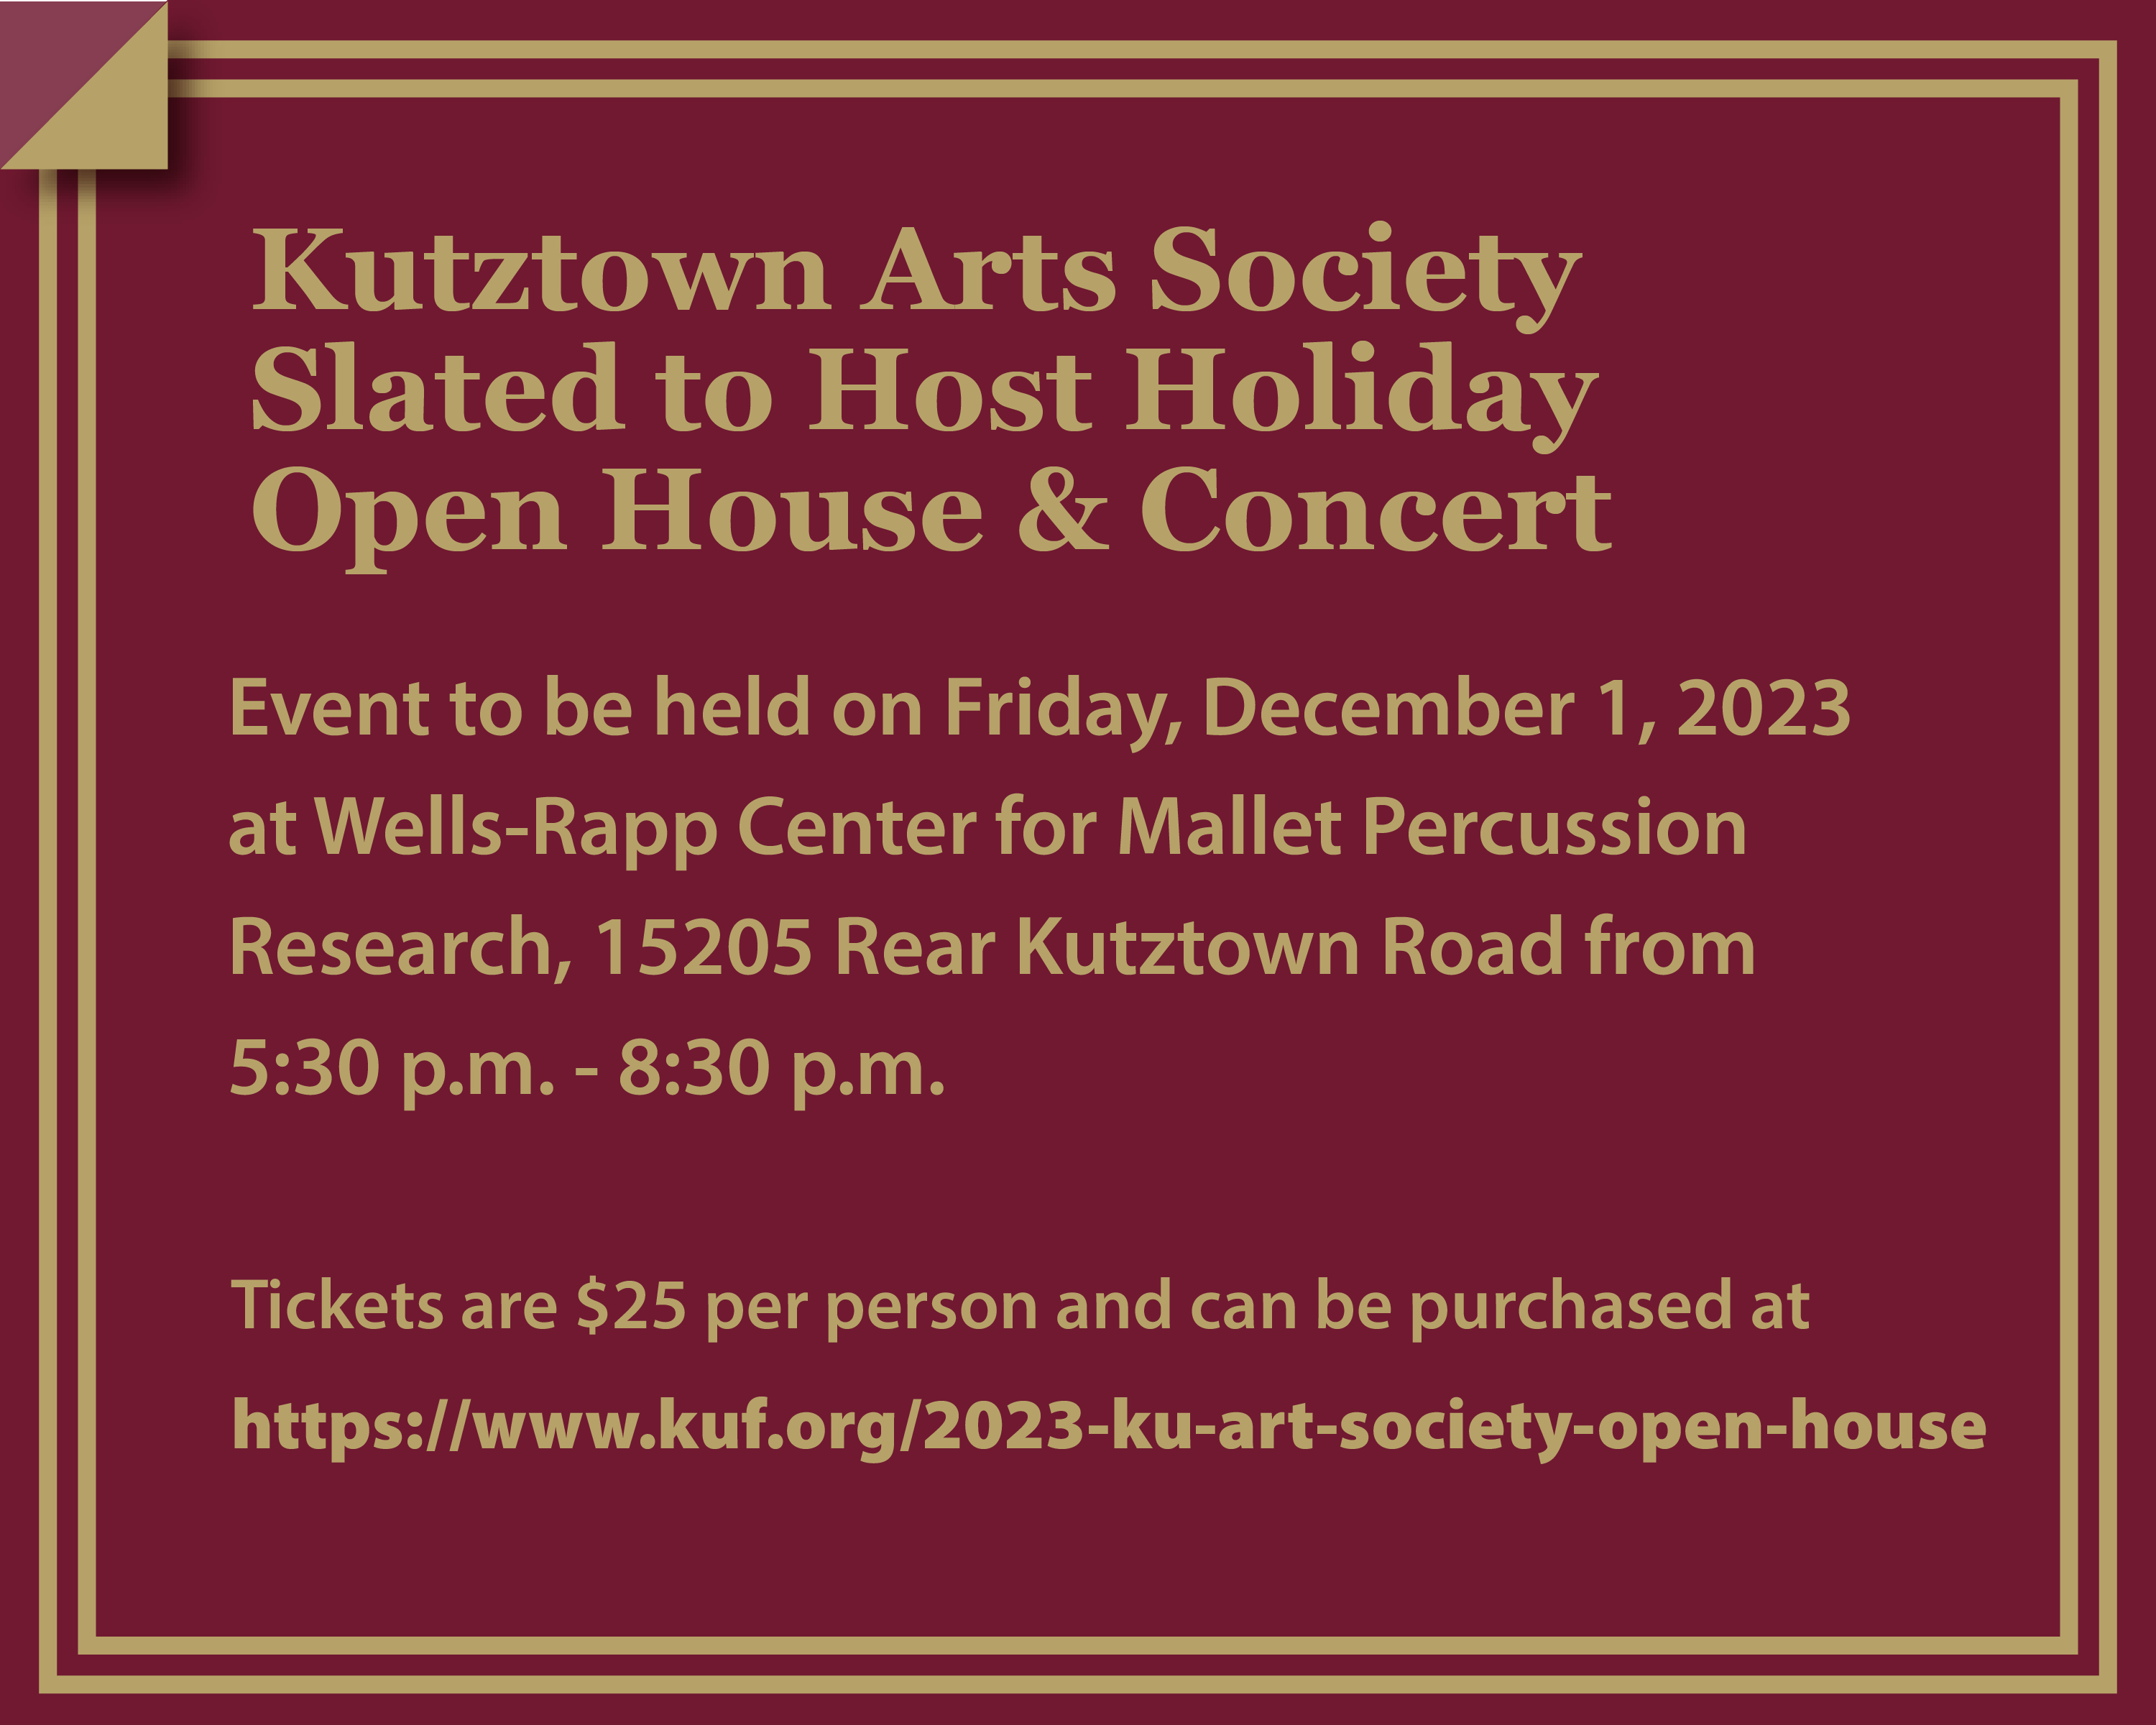 Kutztown Arts Society slated to host holiday open house and concert